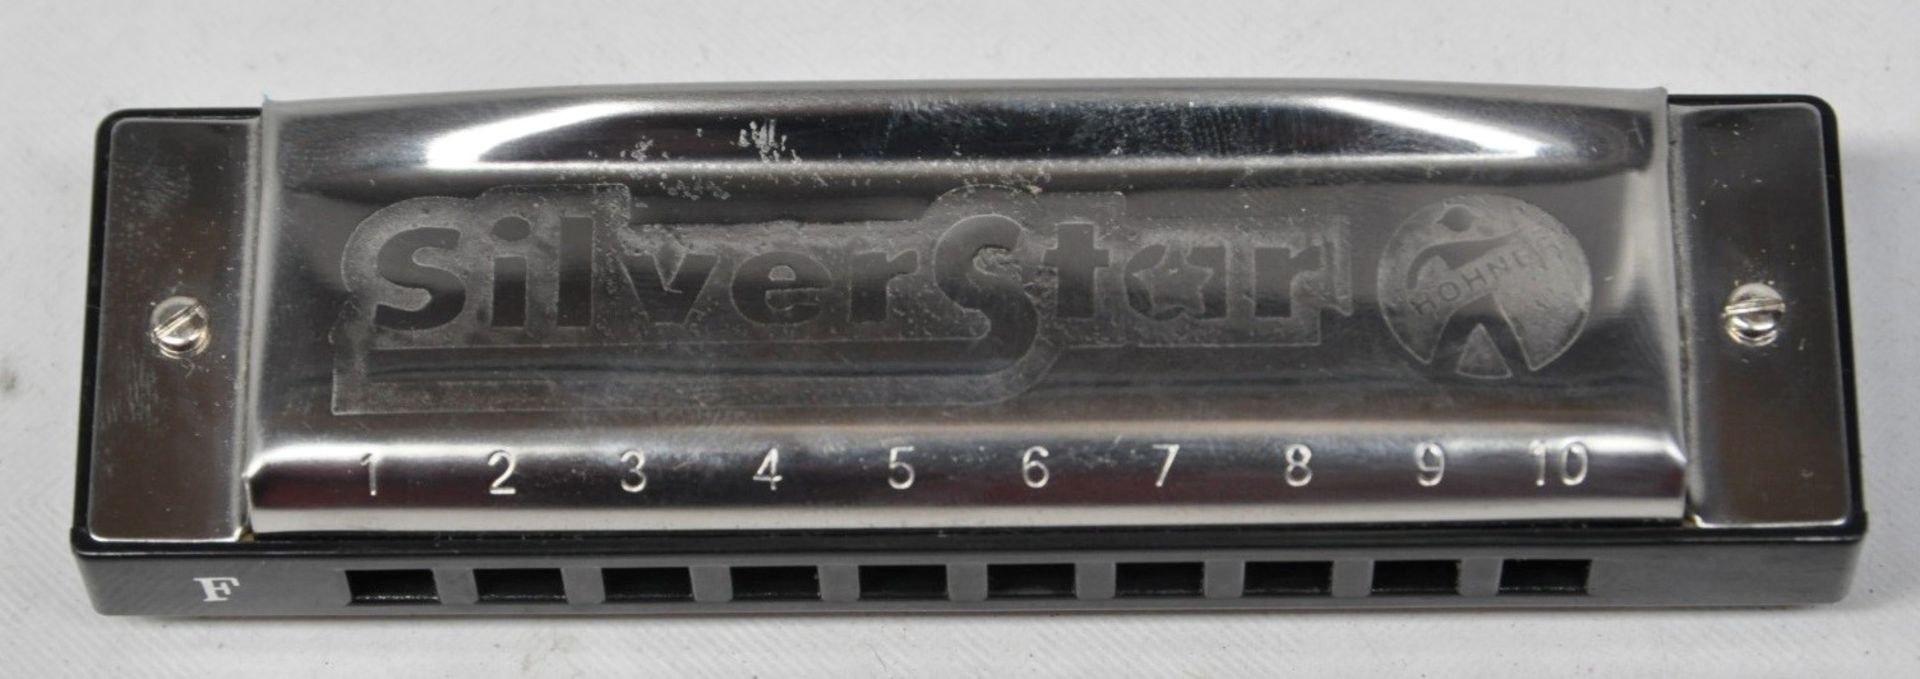 3 x Harmonicas Includes Hohner Silverstar and Stagg Howlin Harp Blues - CL020 - With Cases - - Image 4 of 4